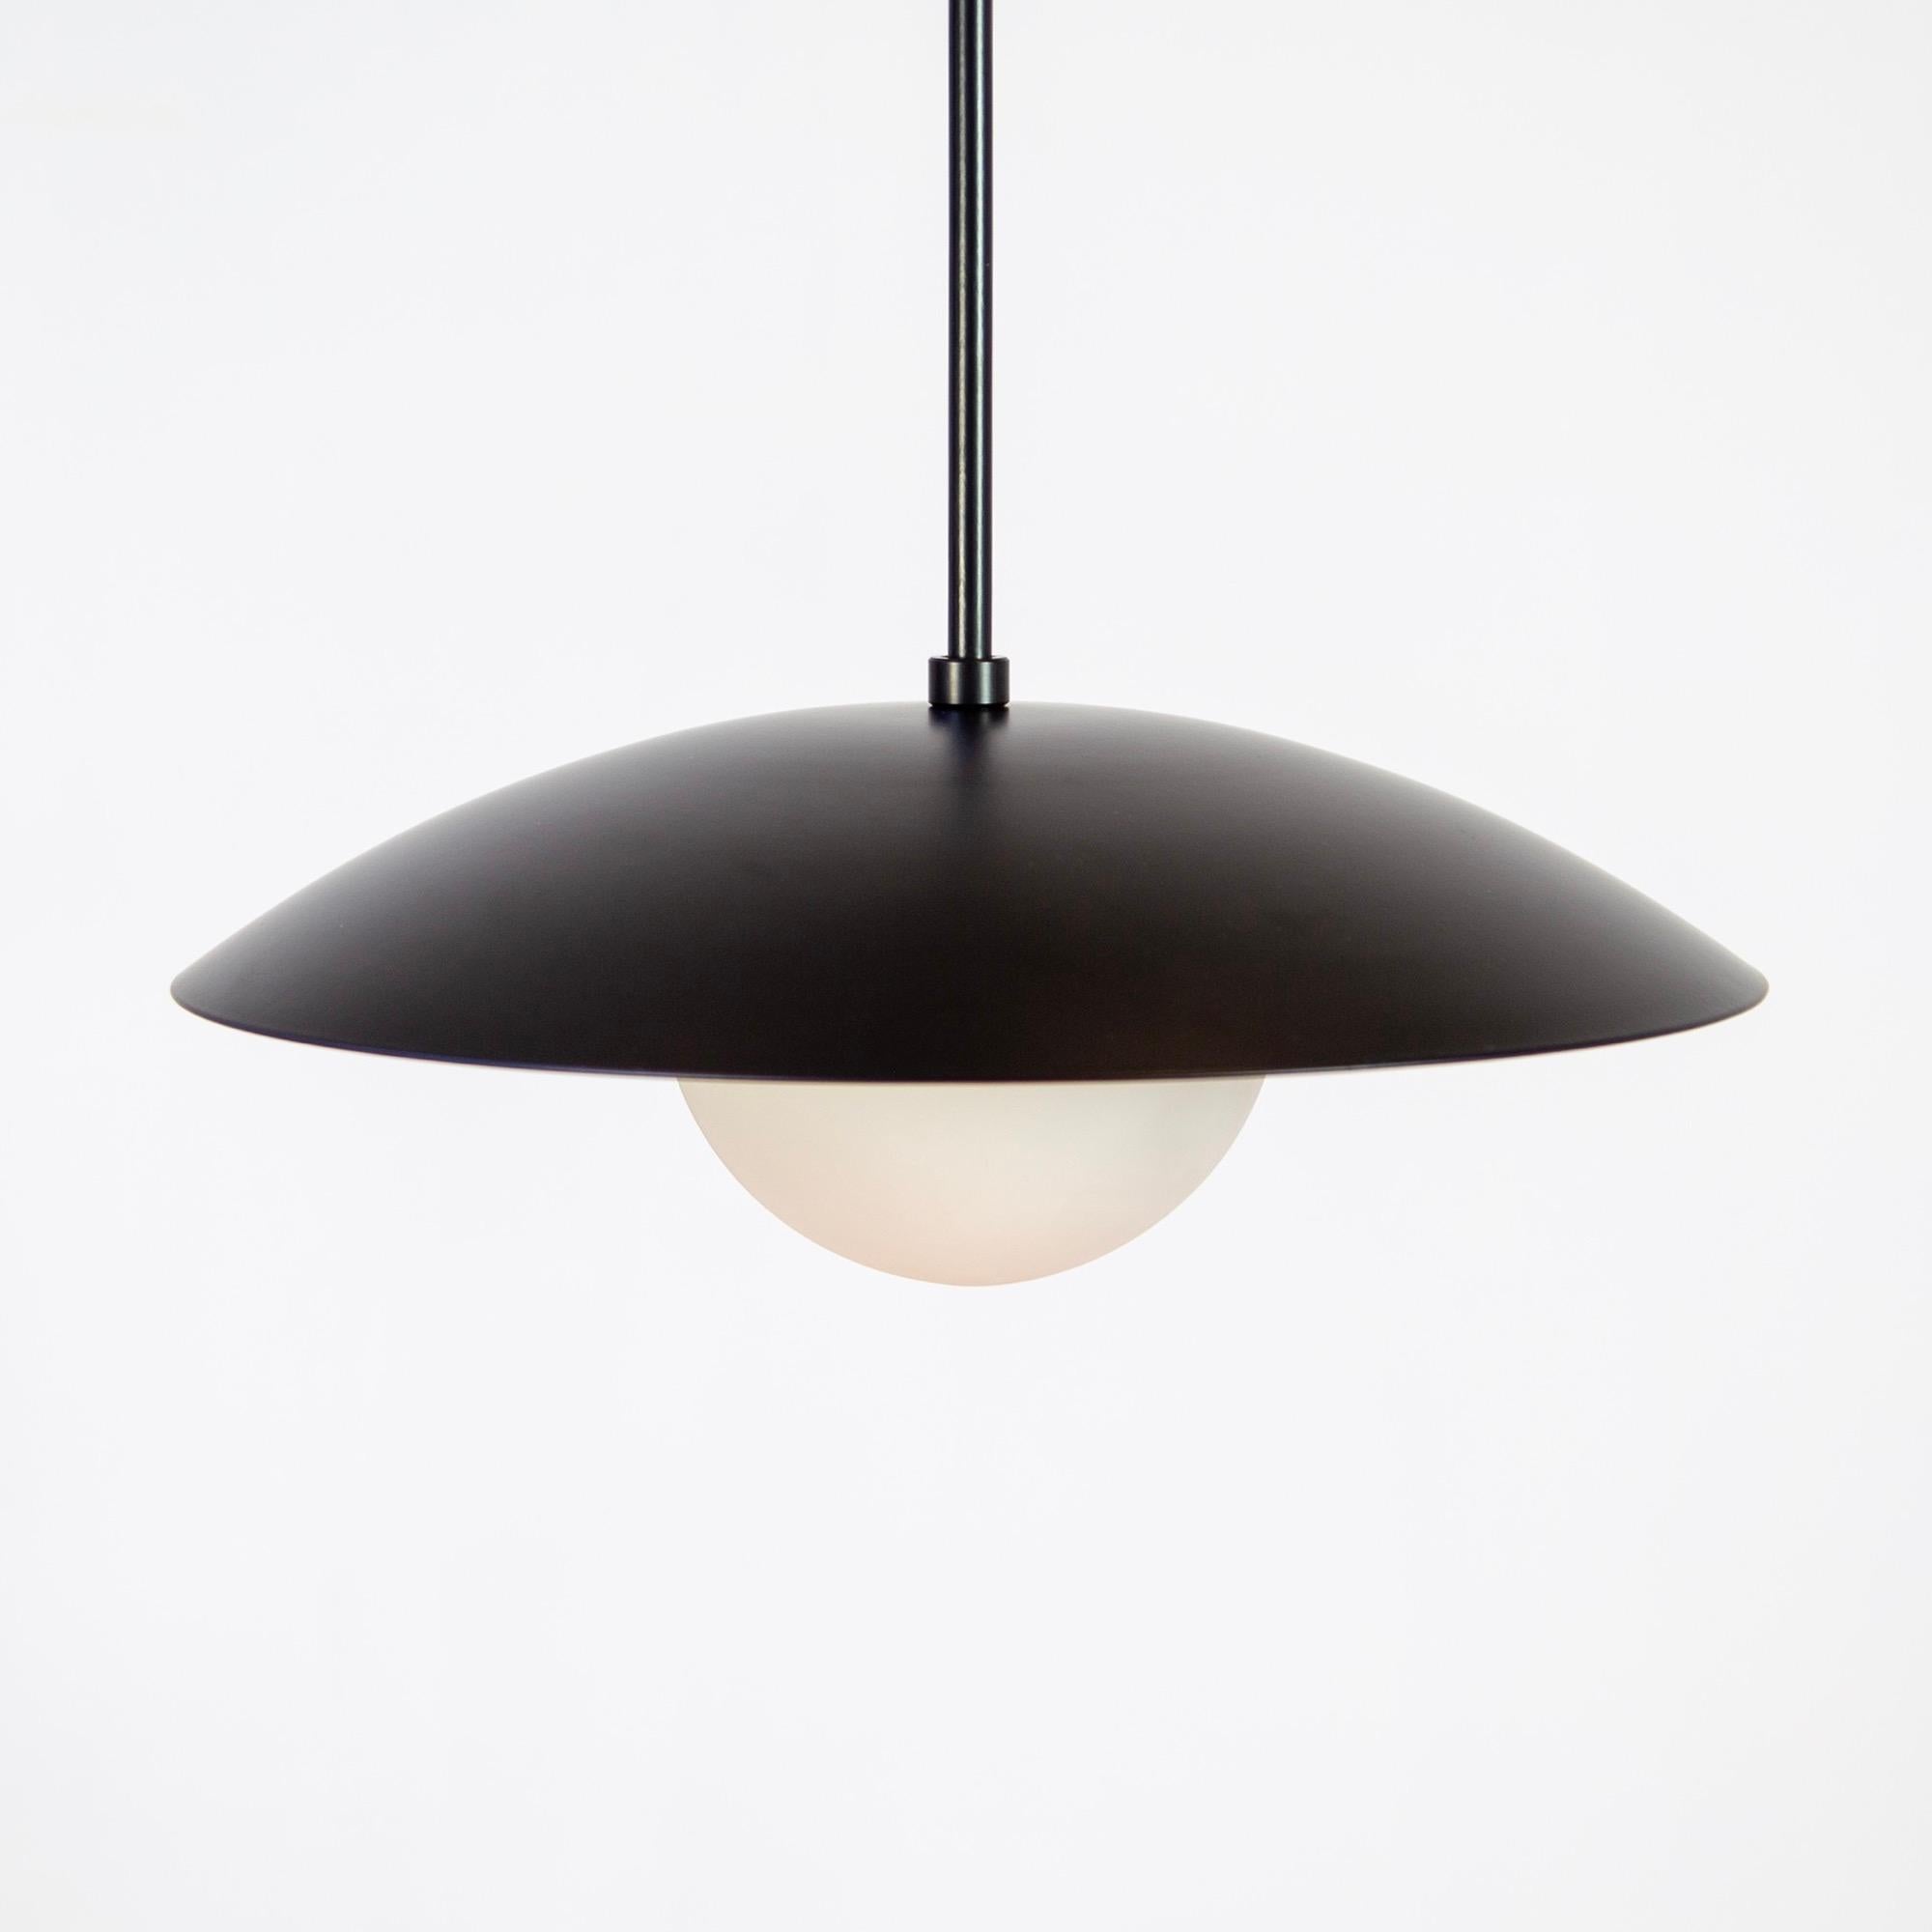 Powder-Coated Dome Pendant by Research.Lighting, Black, Made to Order For Sale